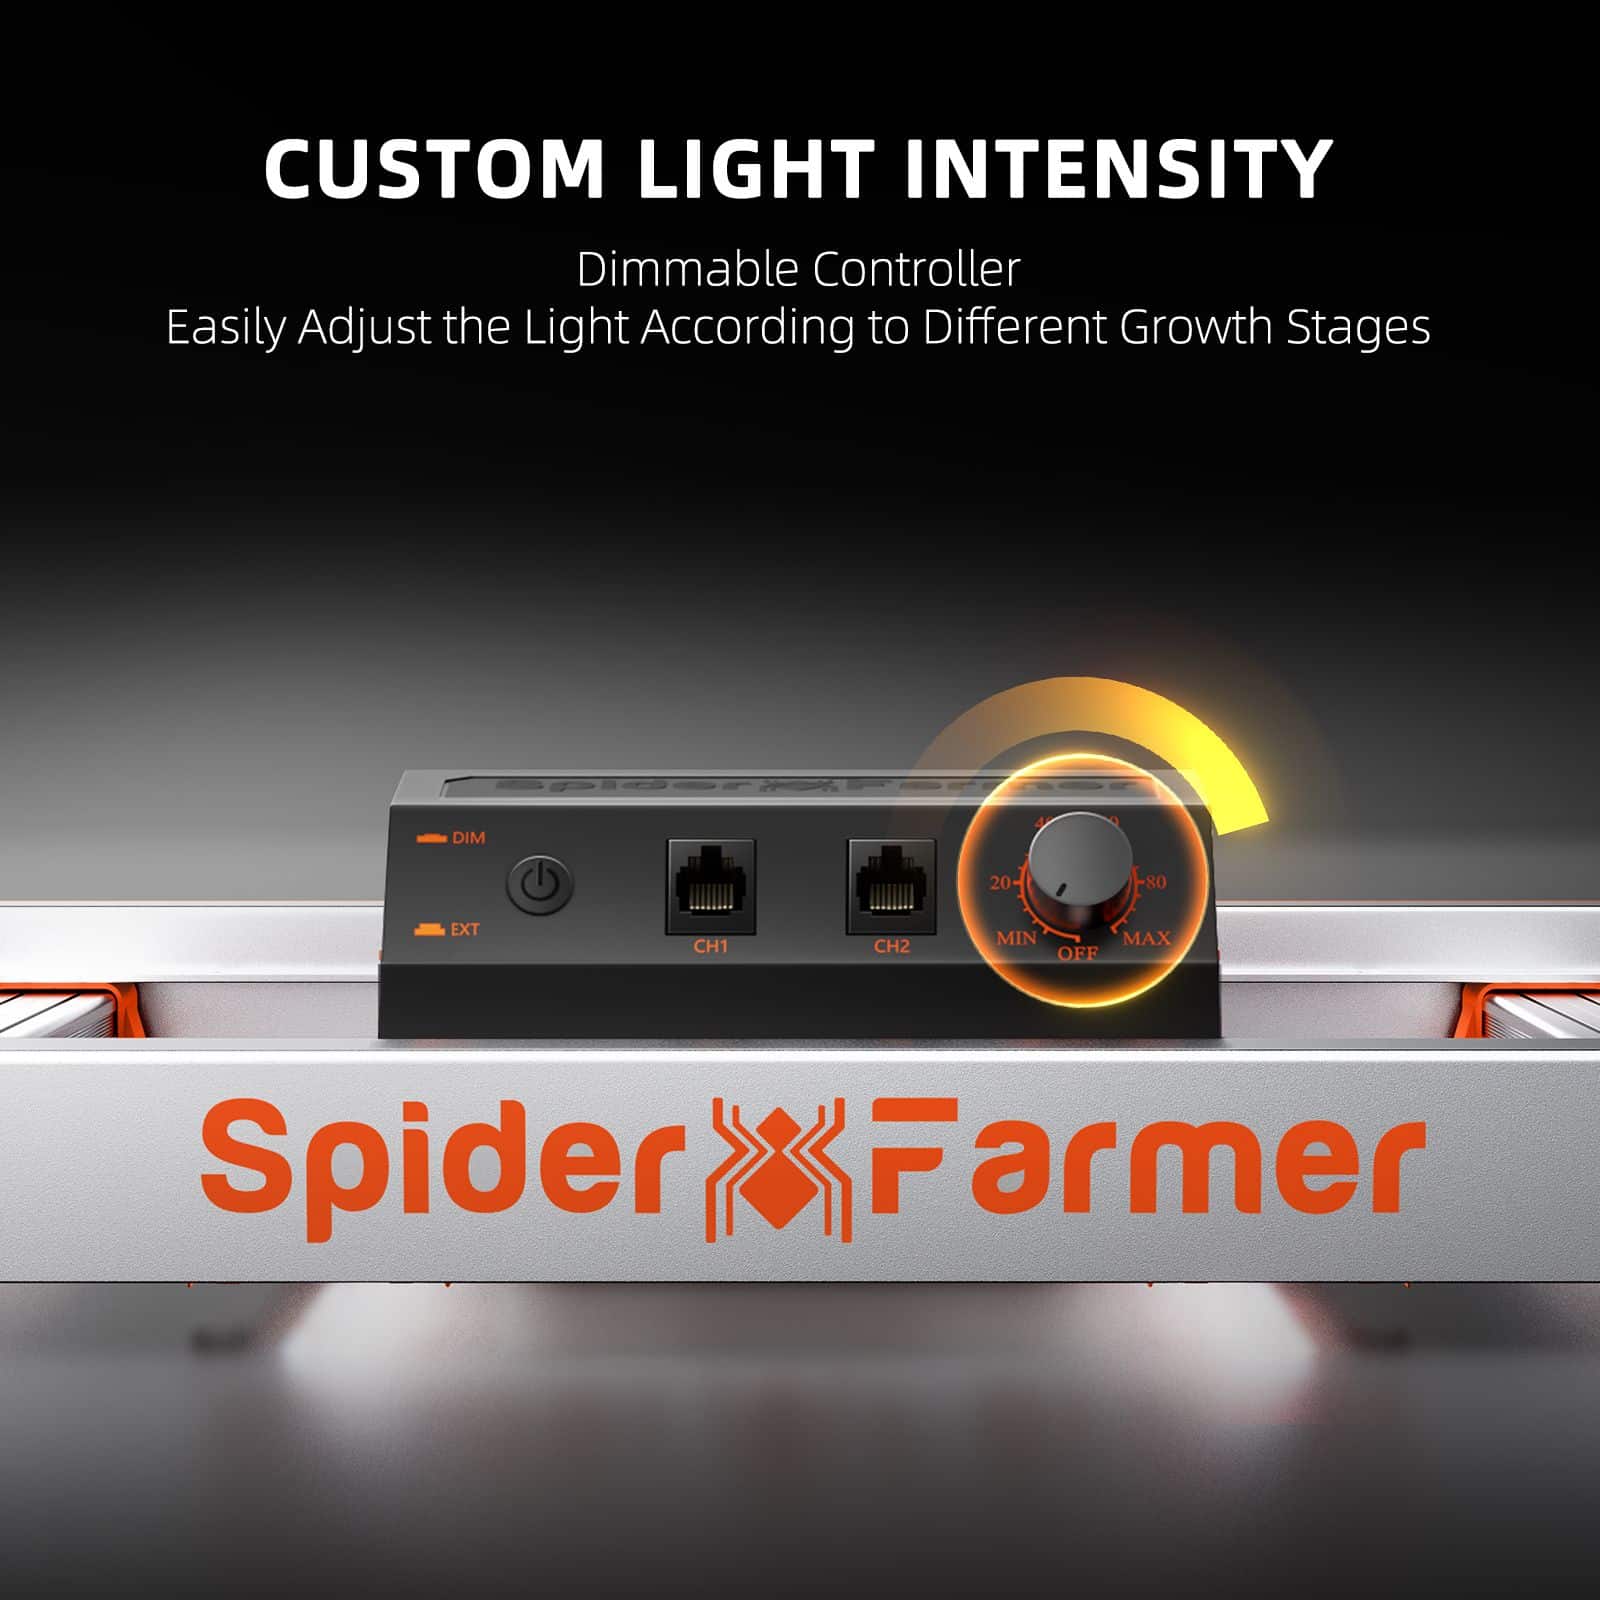 Spider Farmer® G1000W Dimmable Cost-effective Full Spectrum CO2 Commercial LED Grow Light